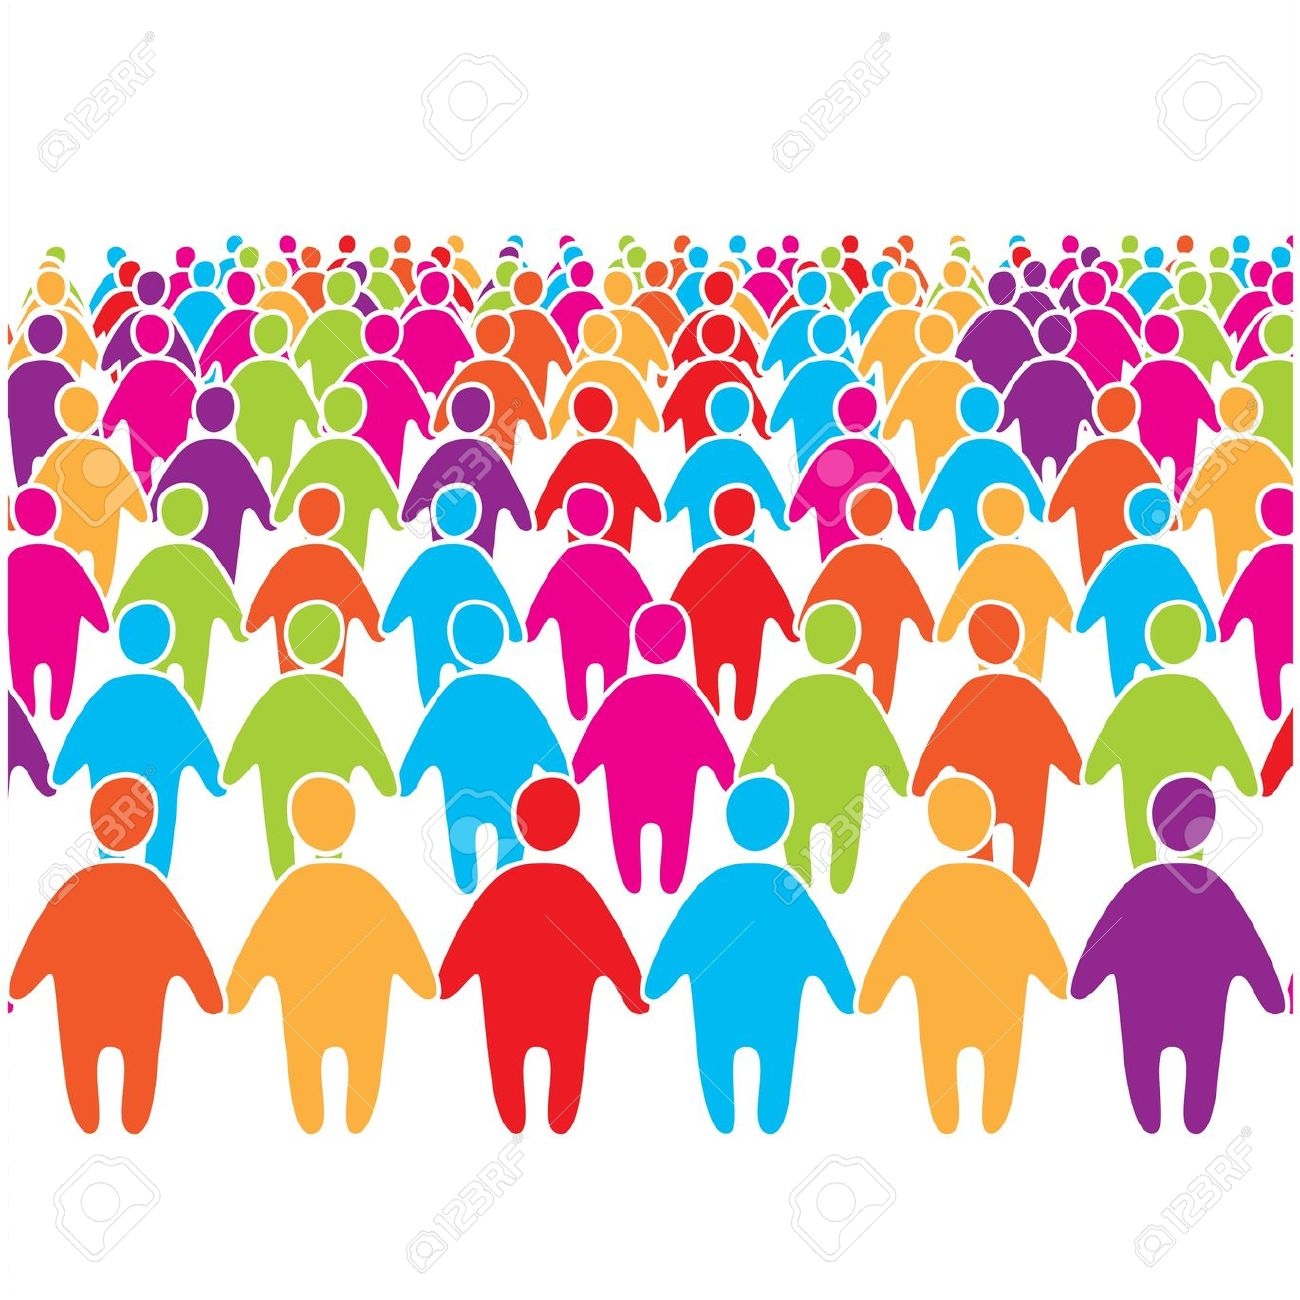 large crowd of people clipart